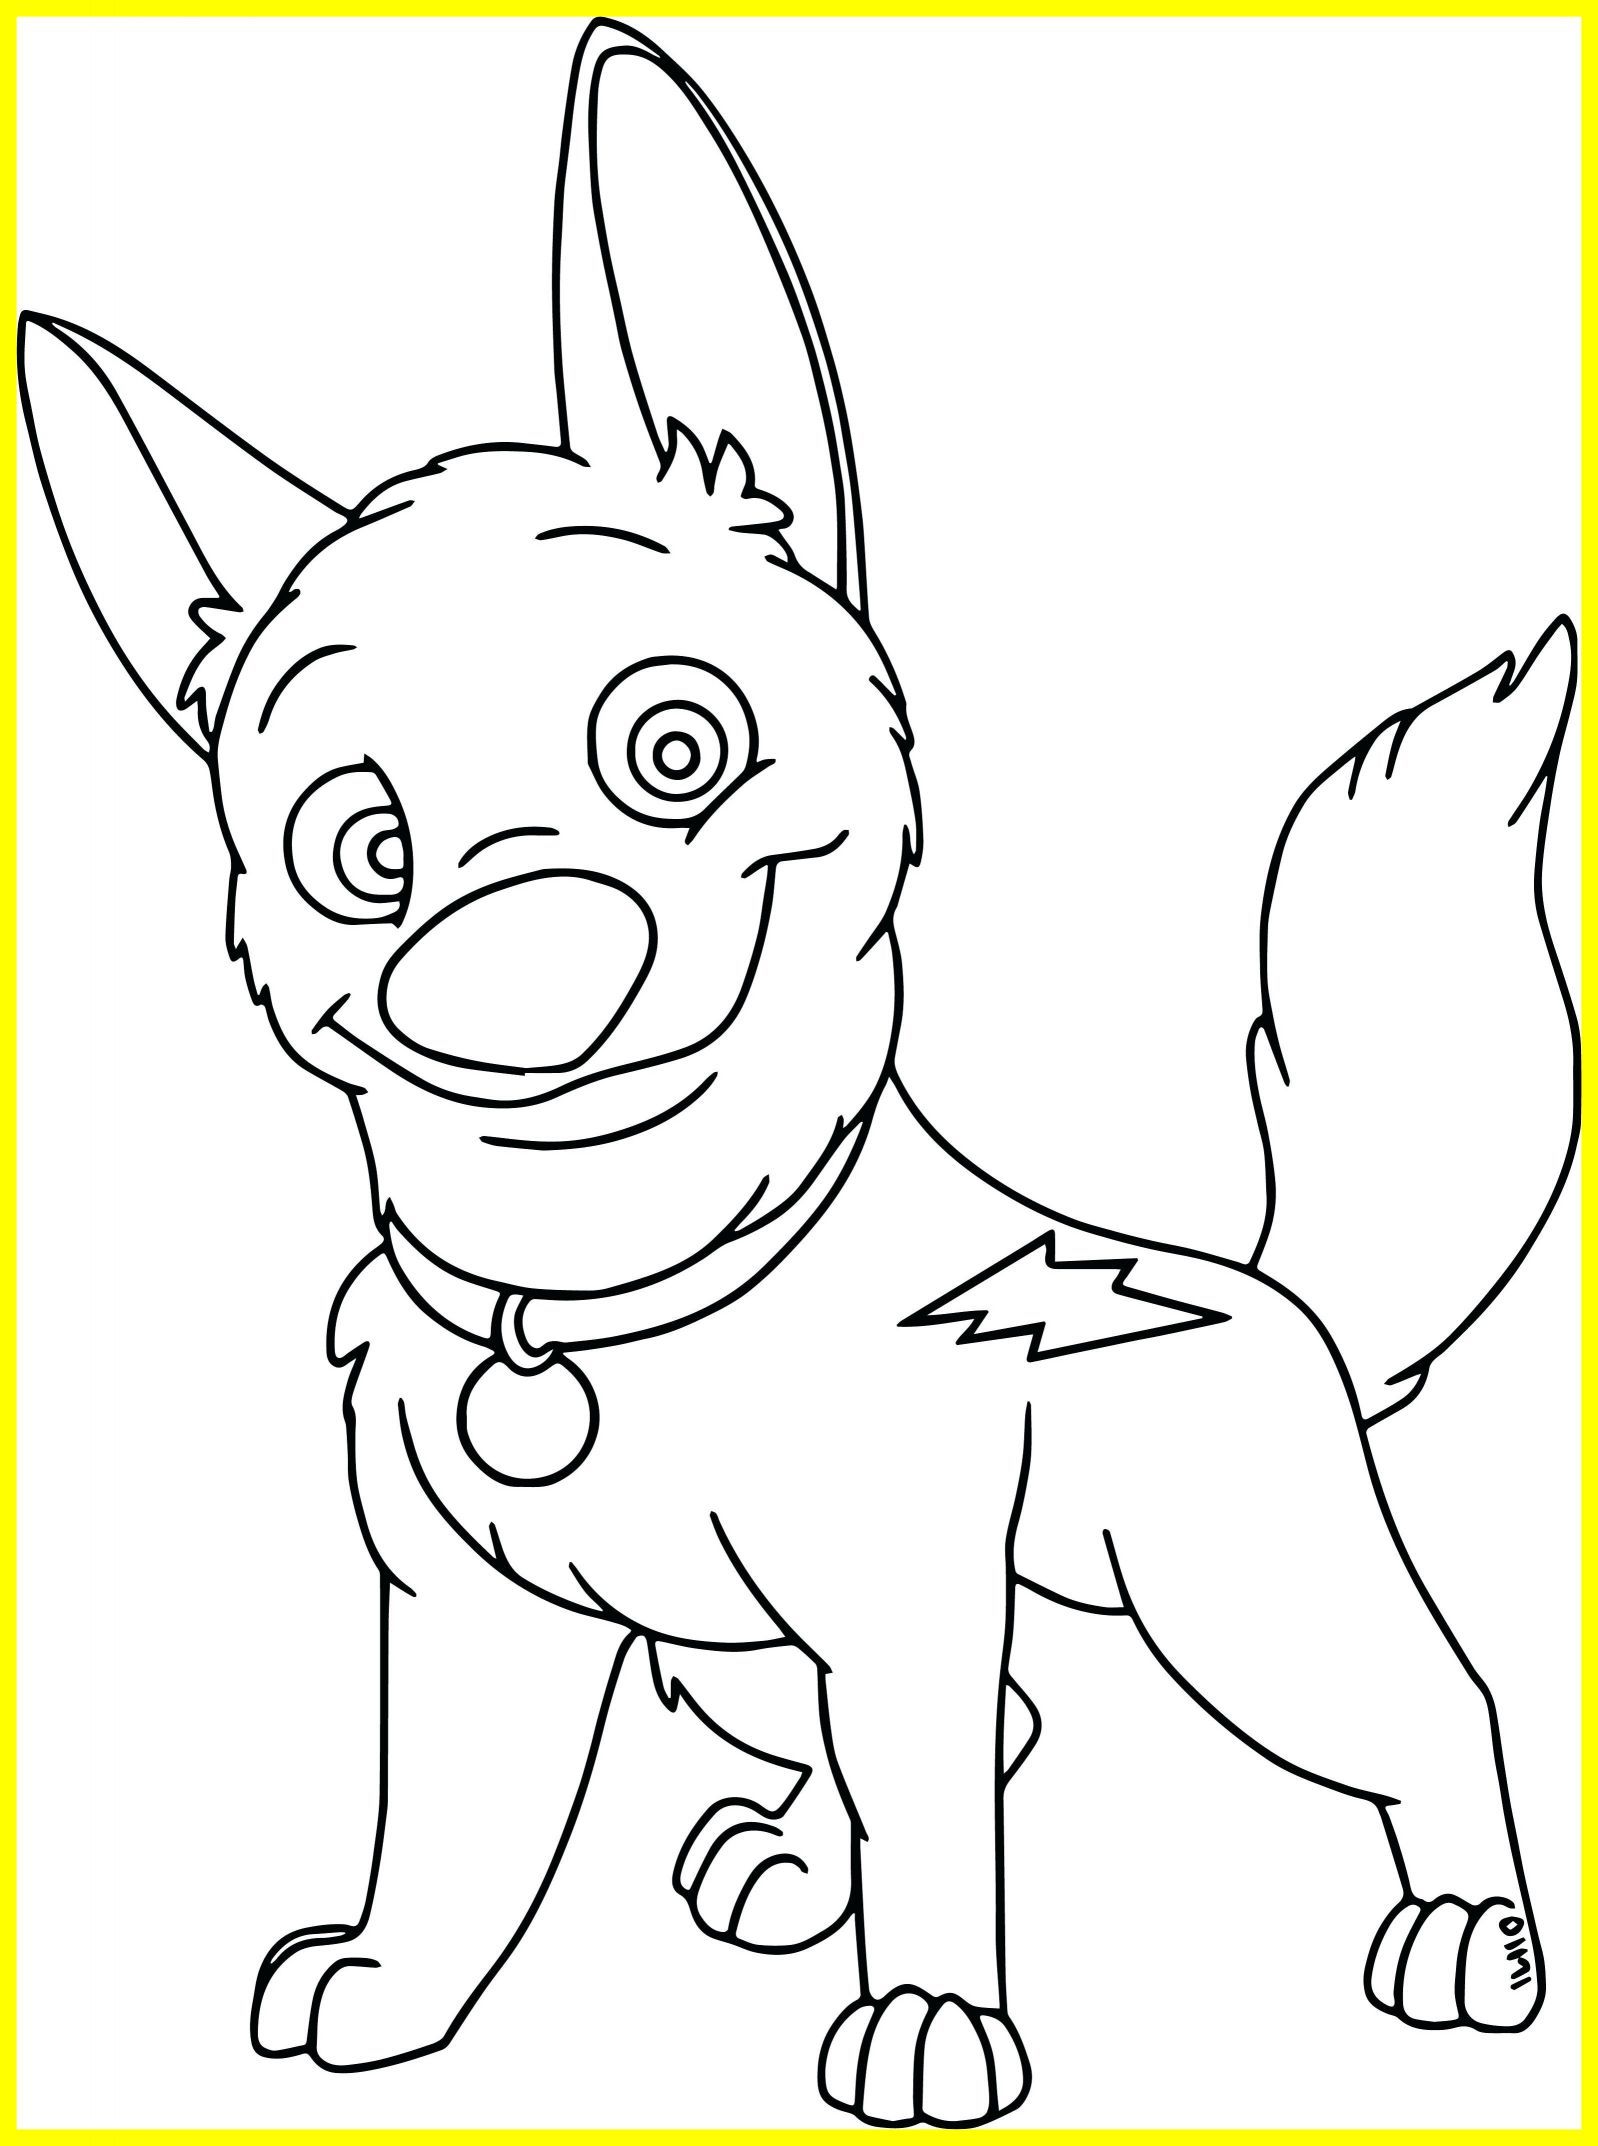 Disney Bolt Coloring Pages at GetDrawings | Free download